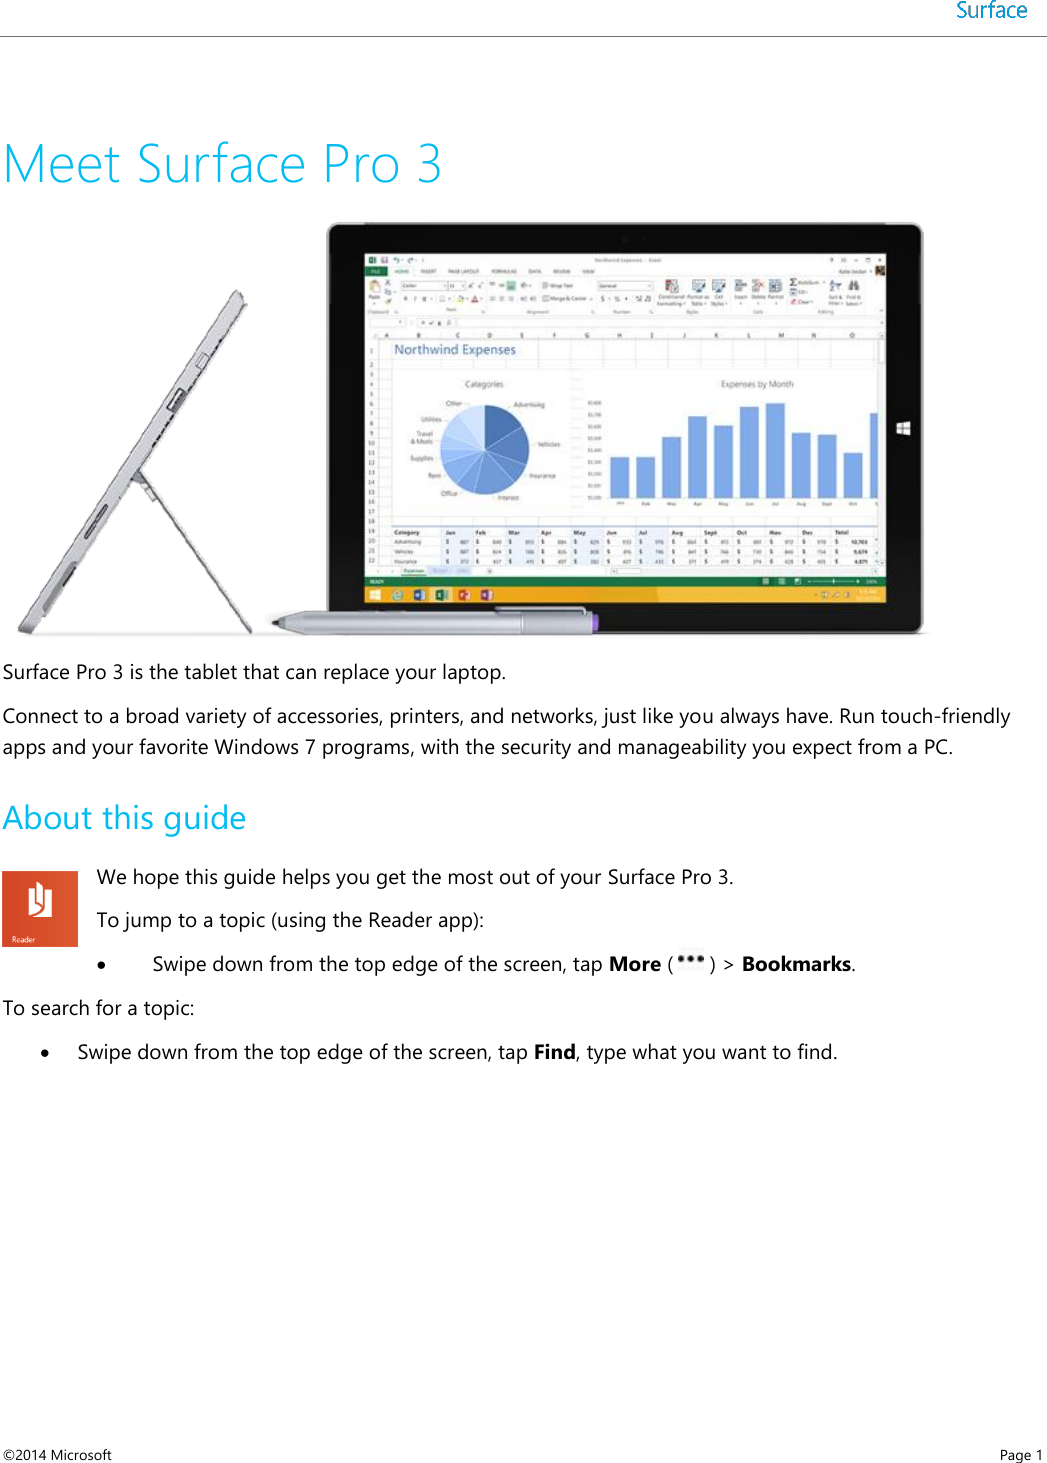 surface 3 user guide windows 10